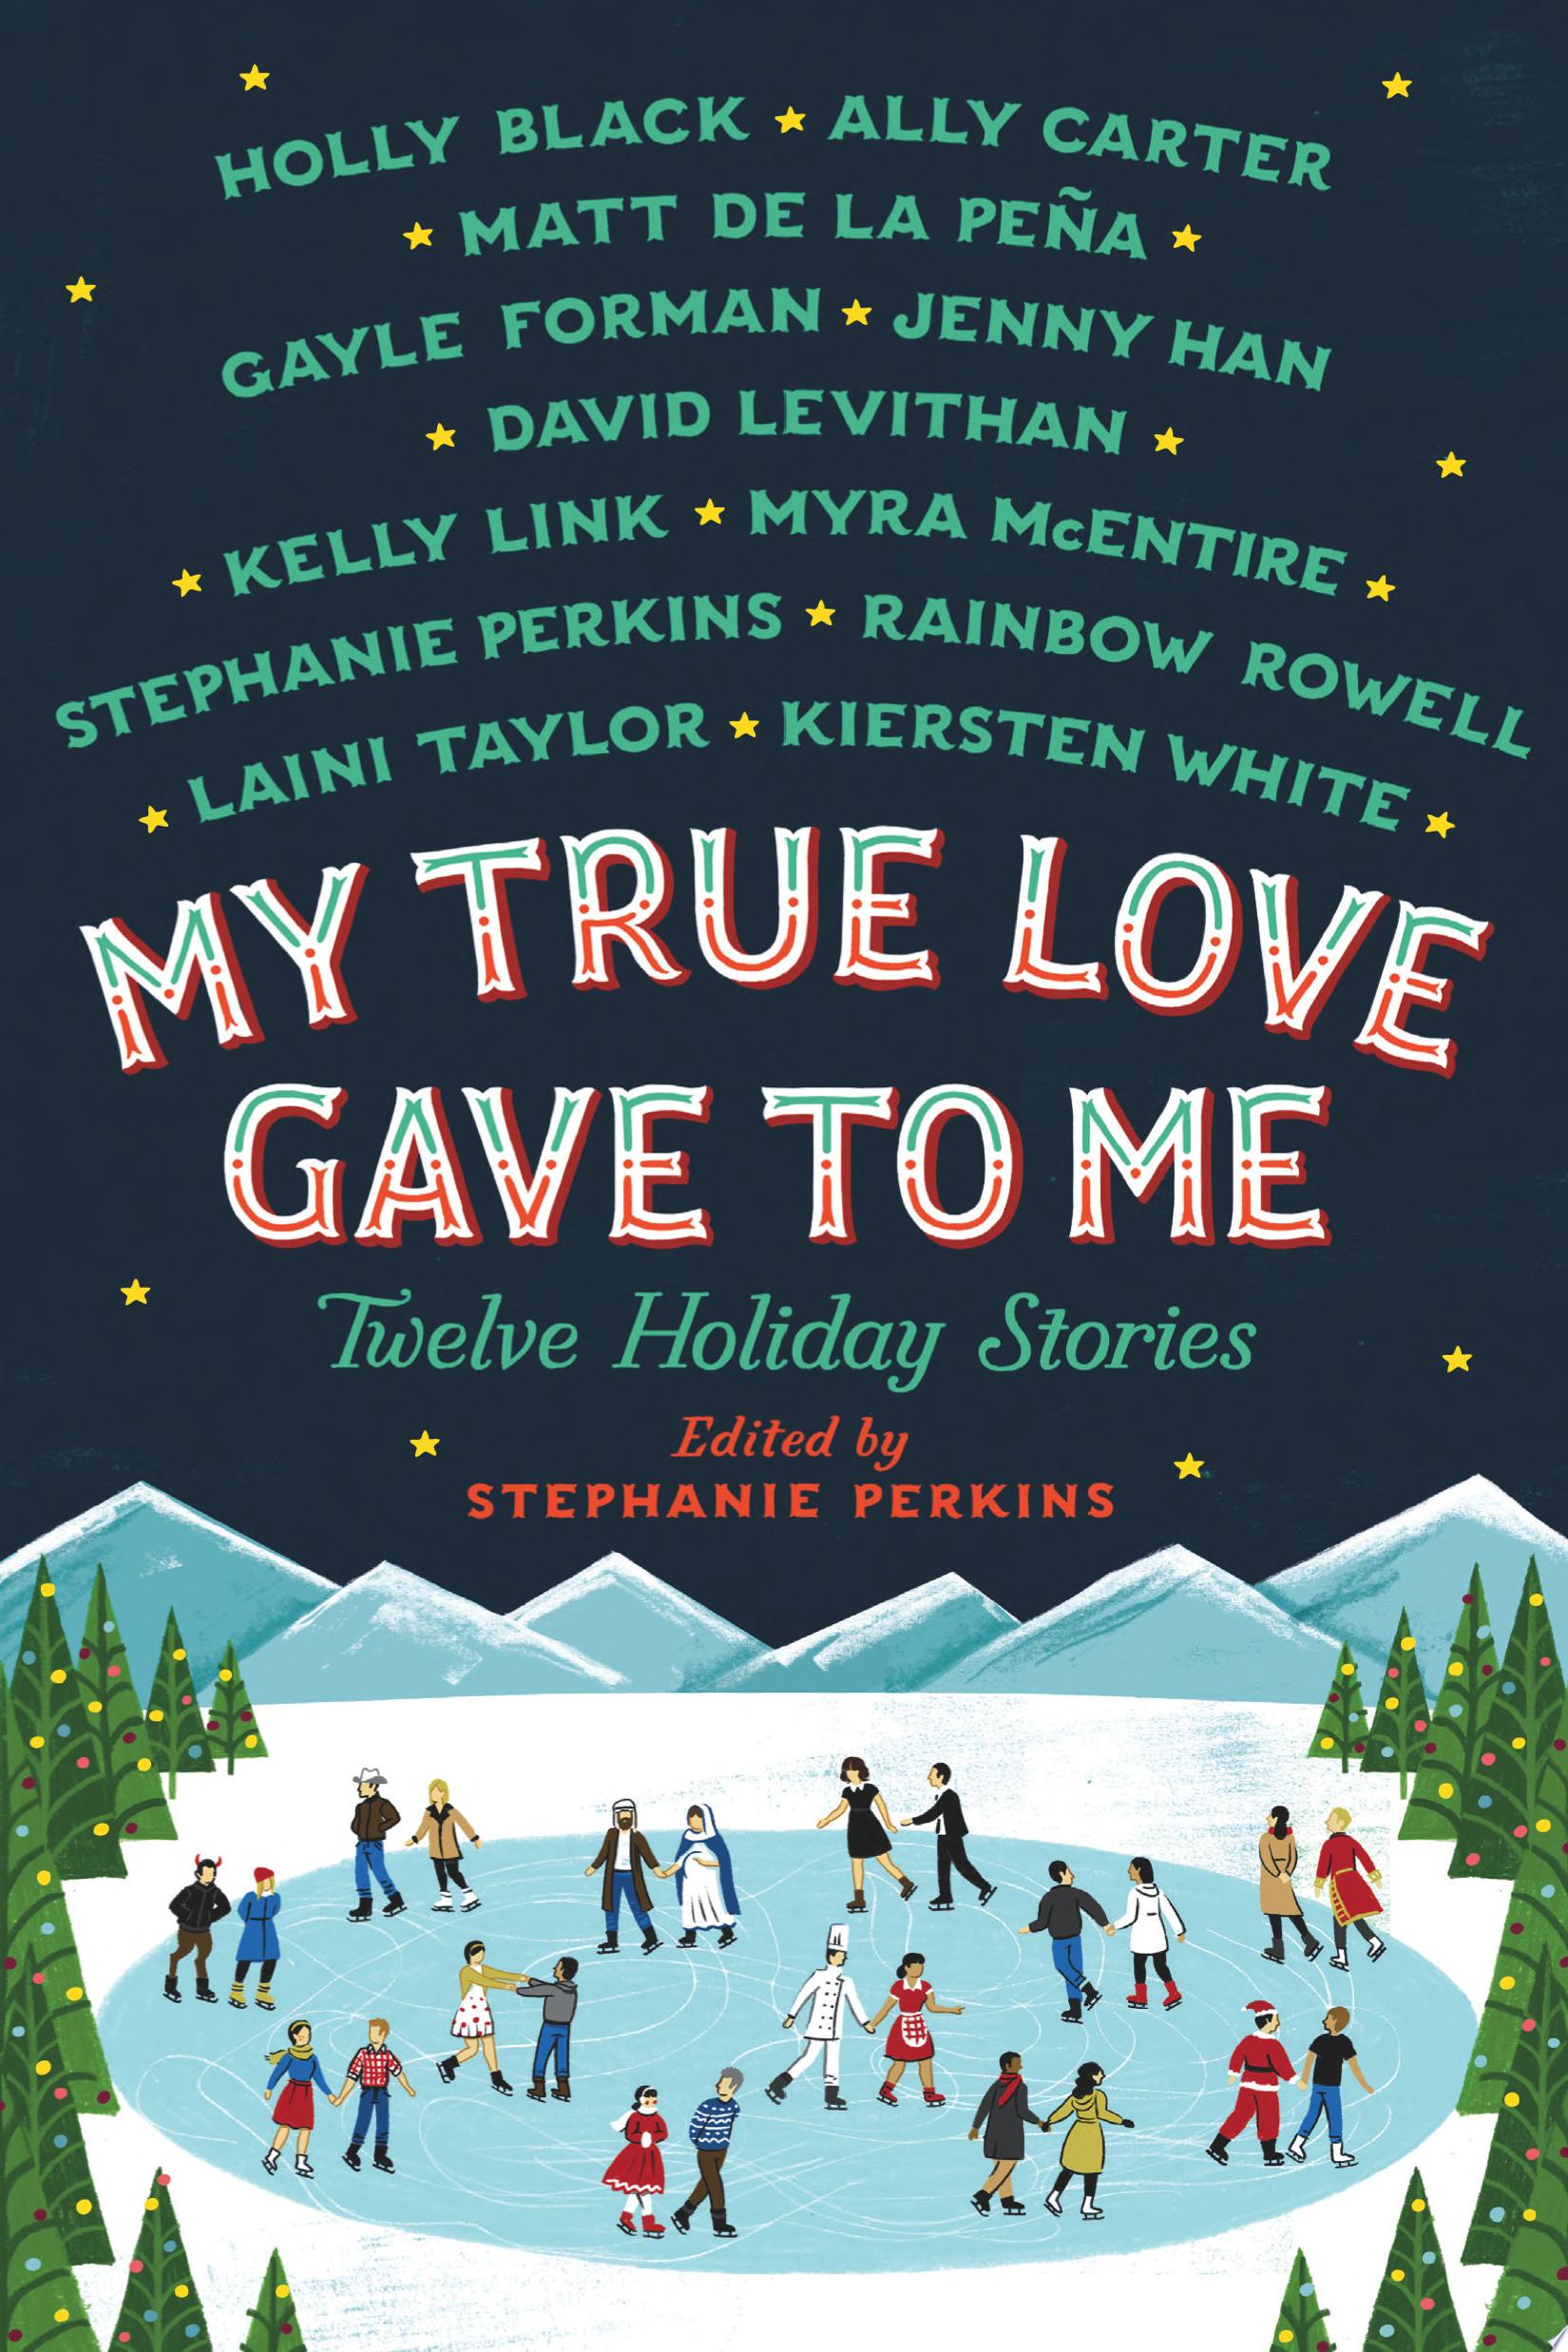 Image for "My True Love Gave To Me"